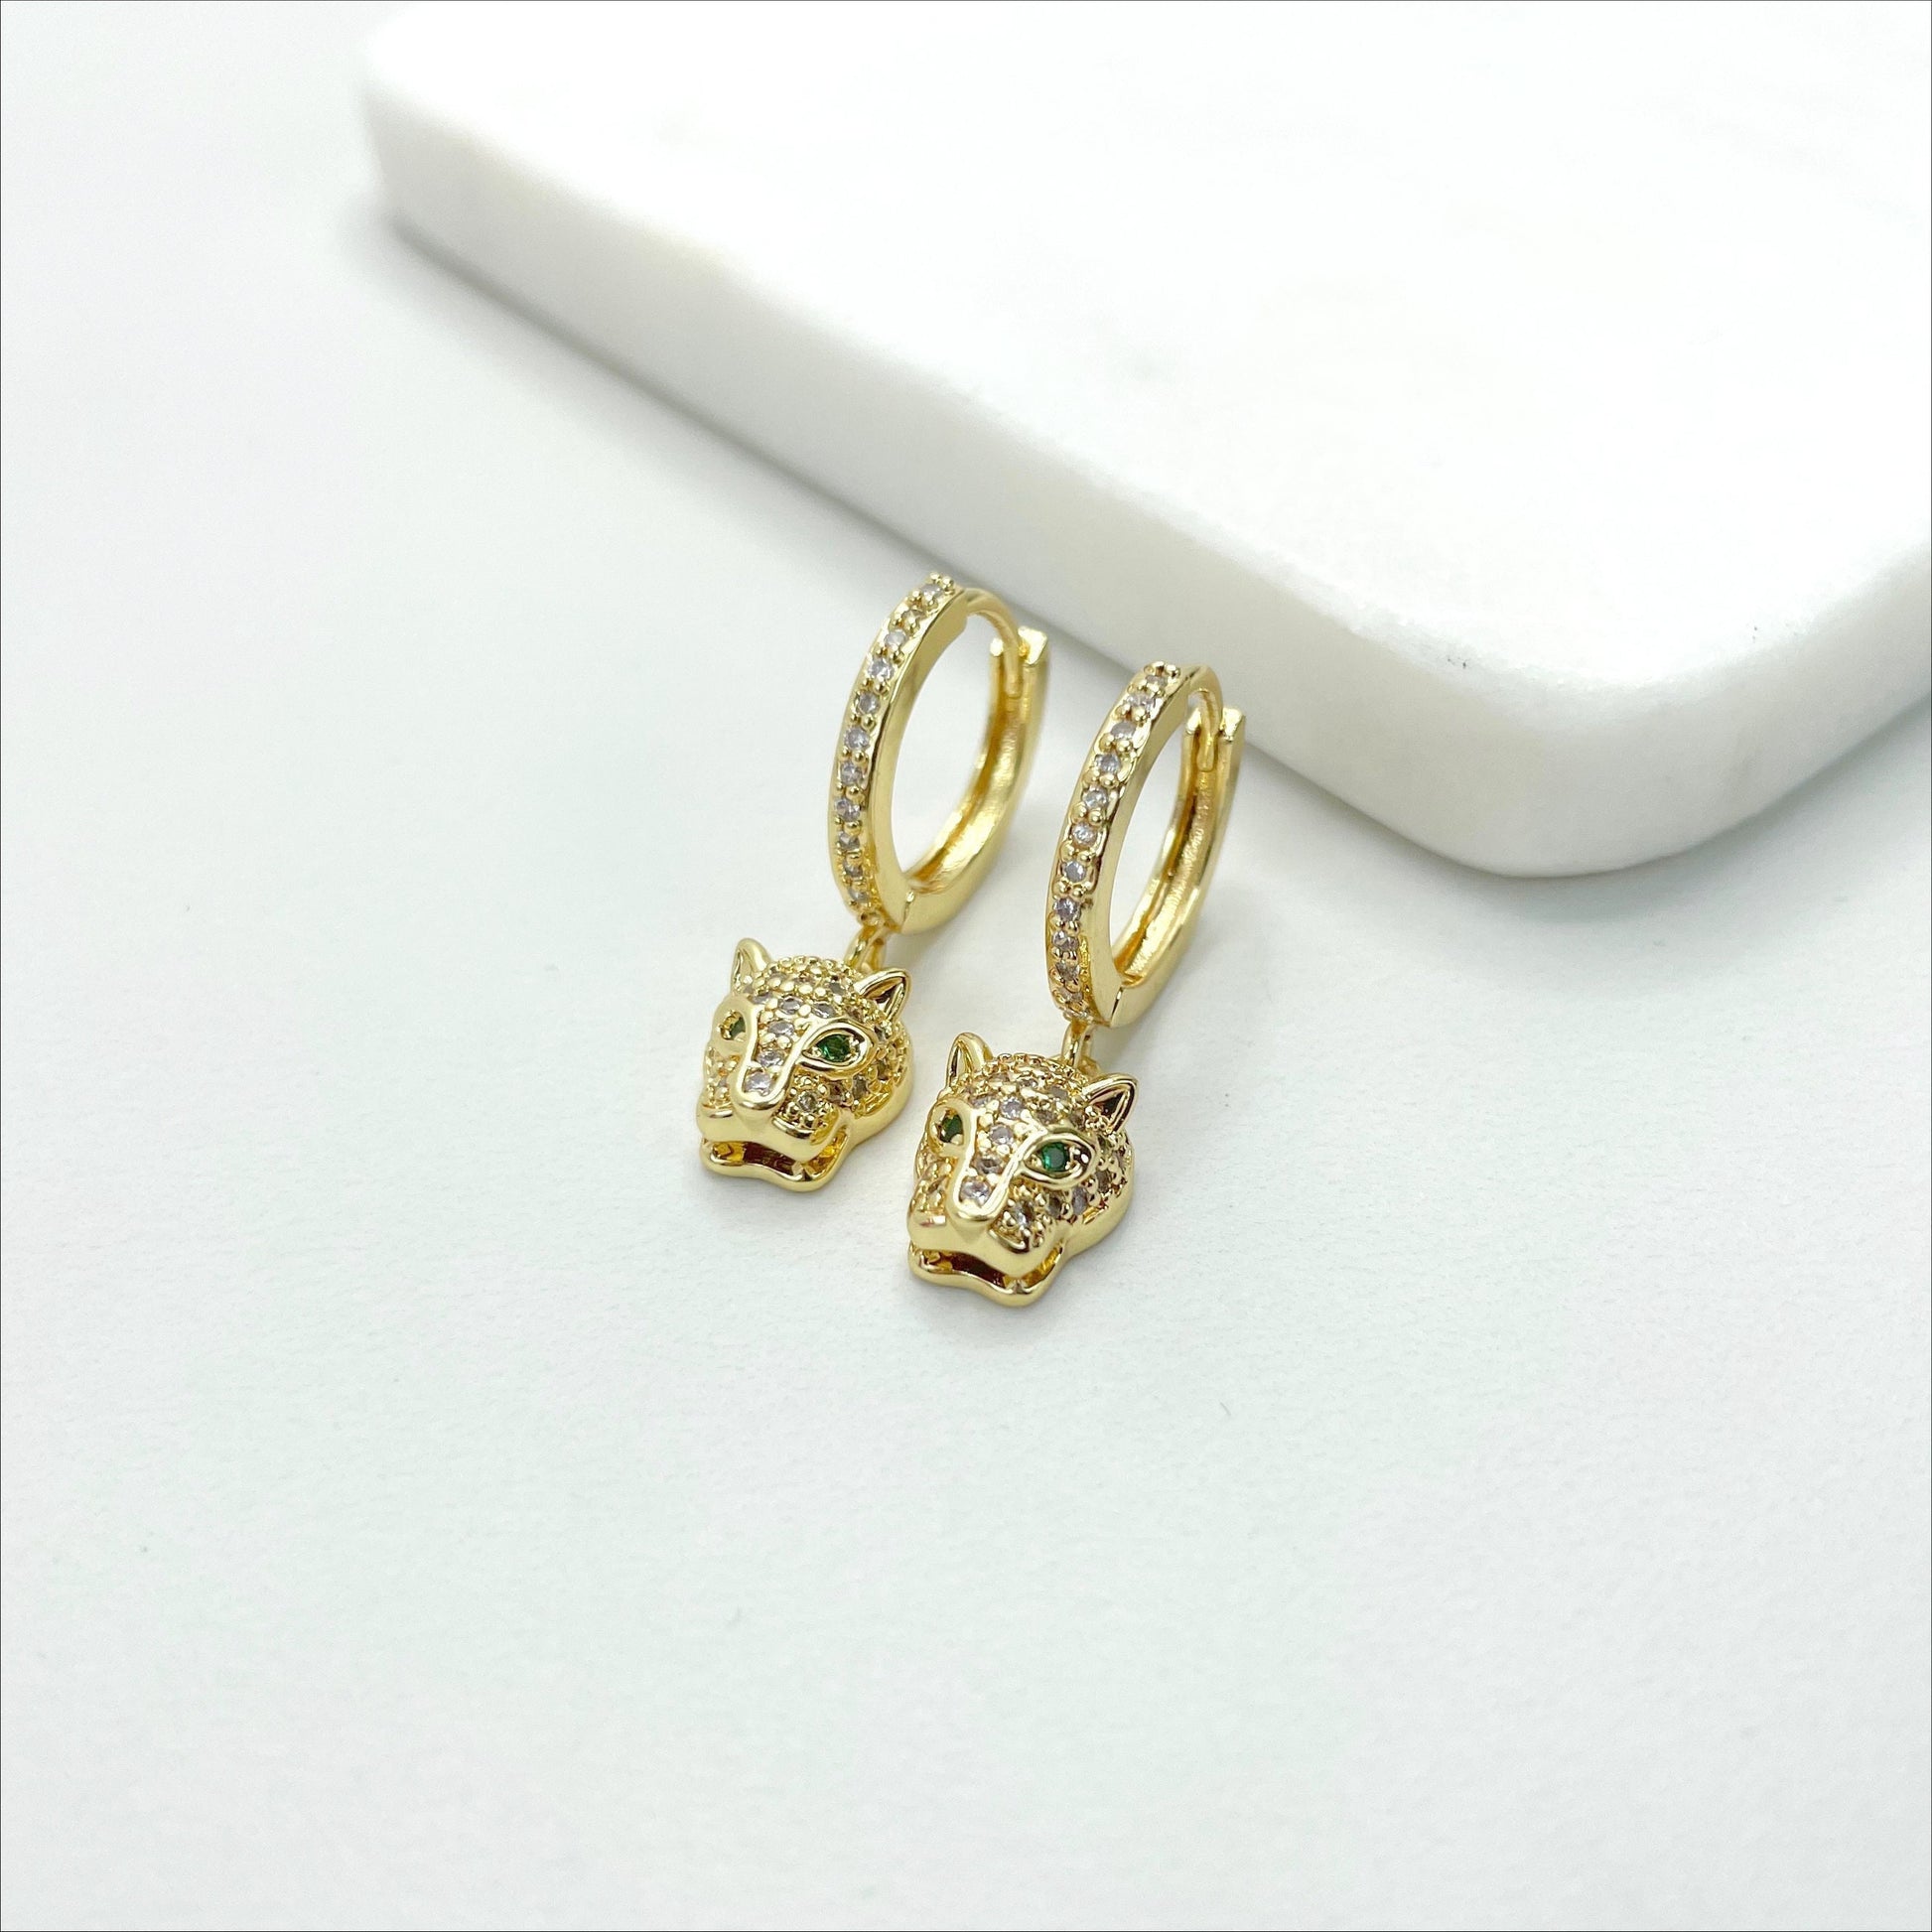 18k Gold Filled Micro Pave Cubic Zirconia Huggie Earrings with Panther Head Design Charms Wholesale Jewelry Making Supplies